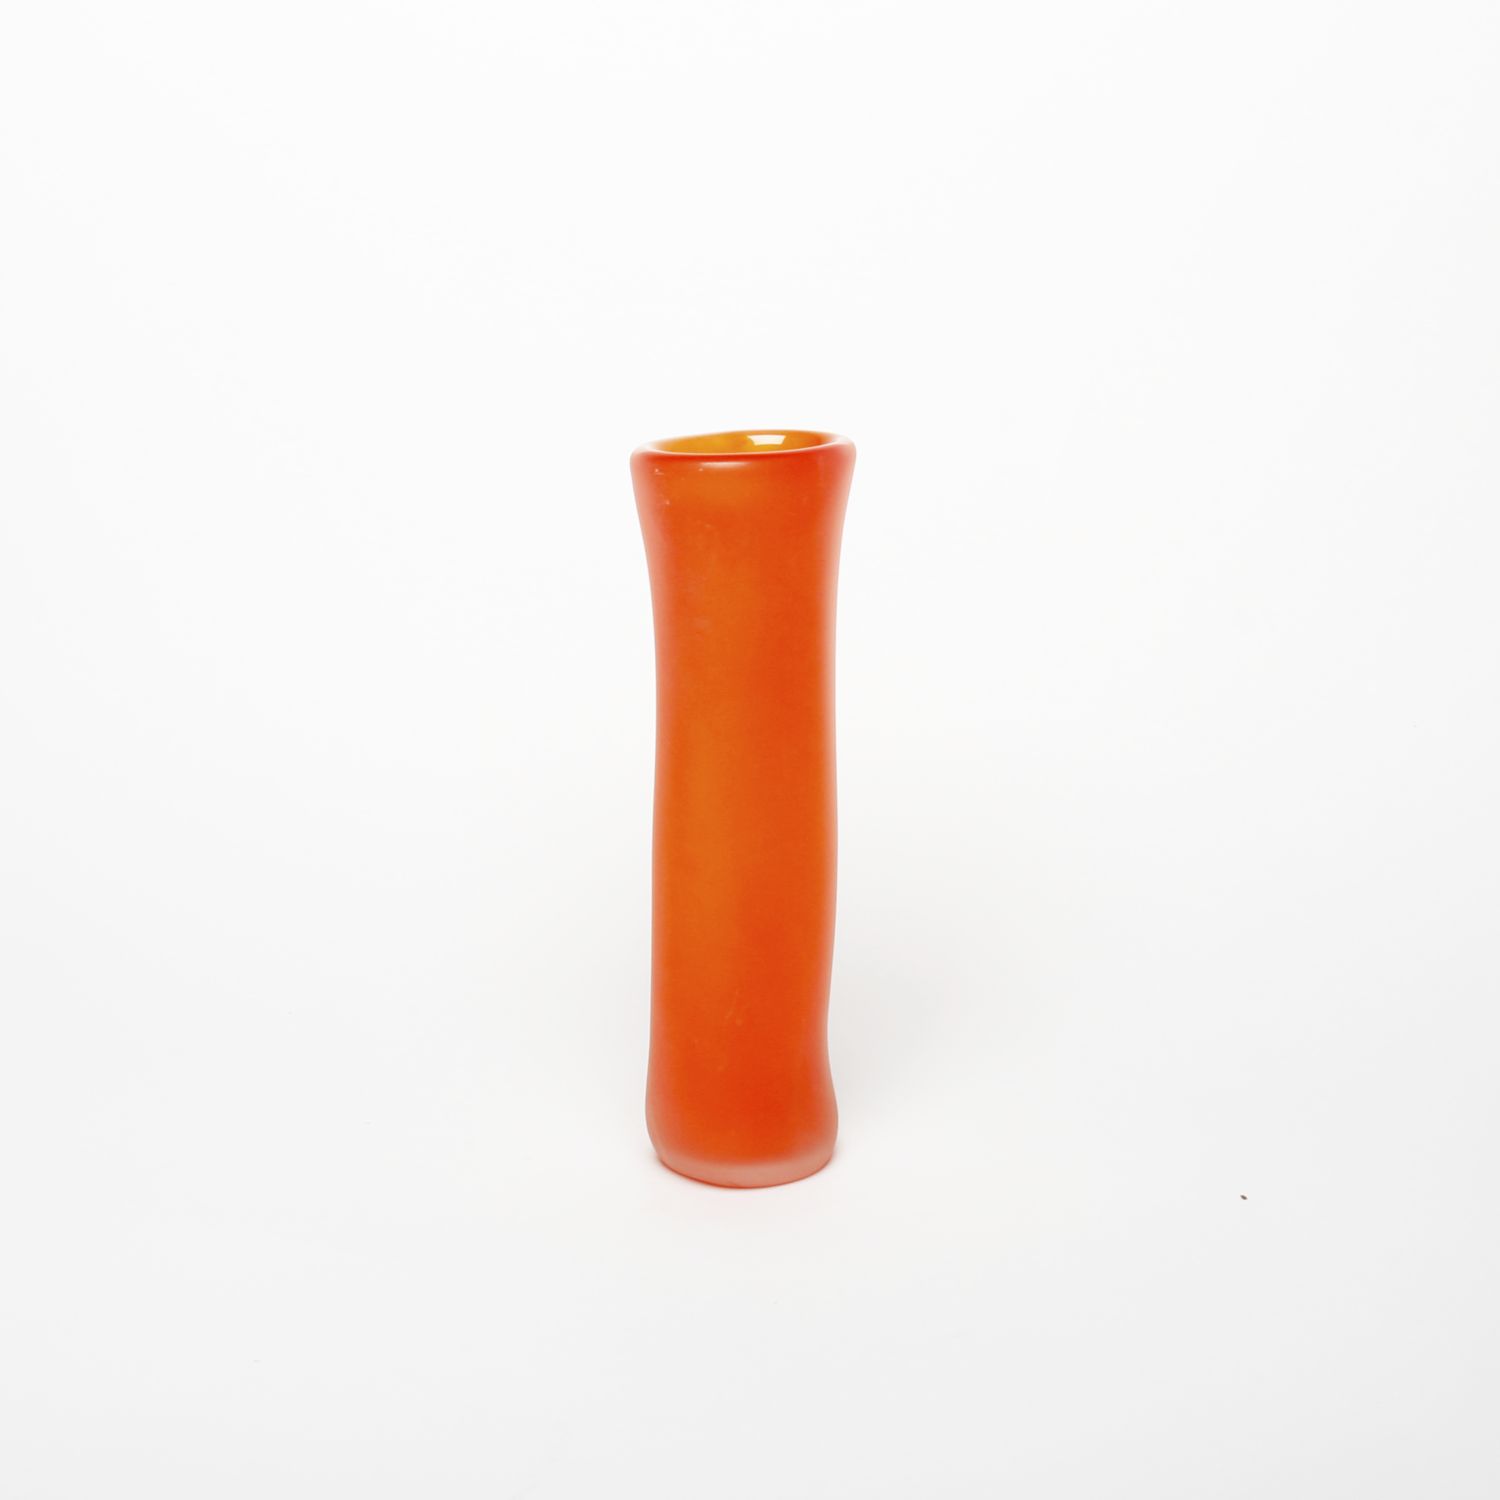 Jill Allan: Large Fat Lipped Vase (Assorted colours) Product Image 7 of 7